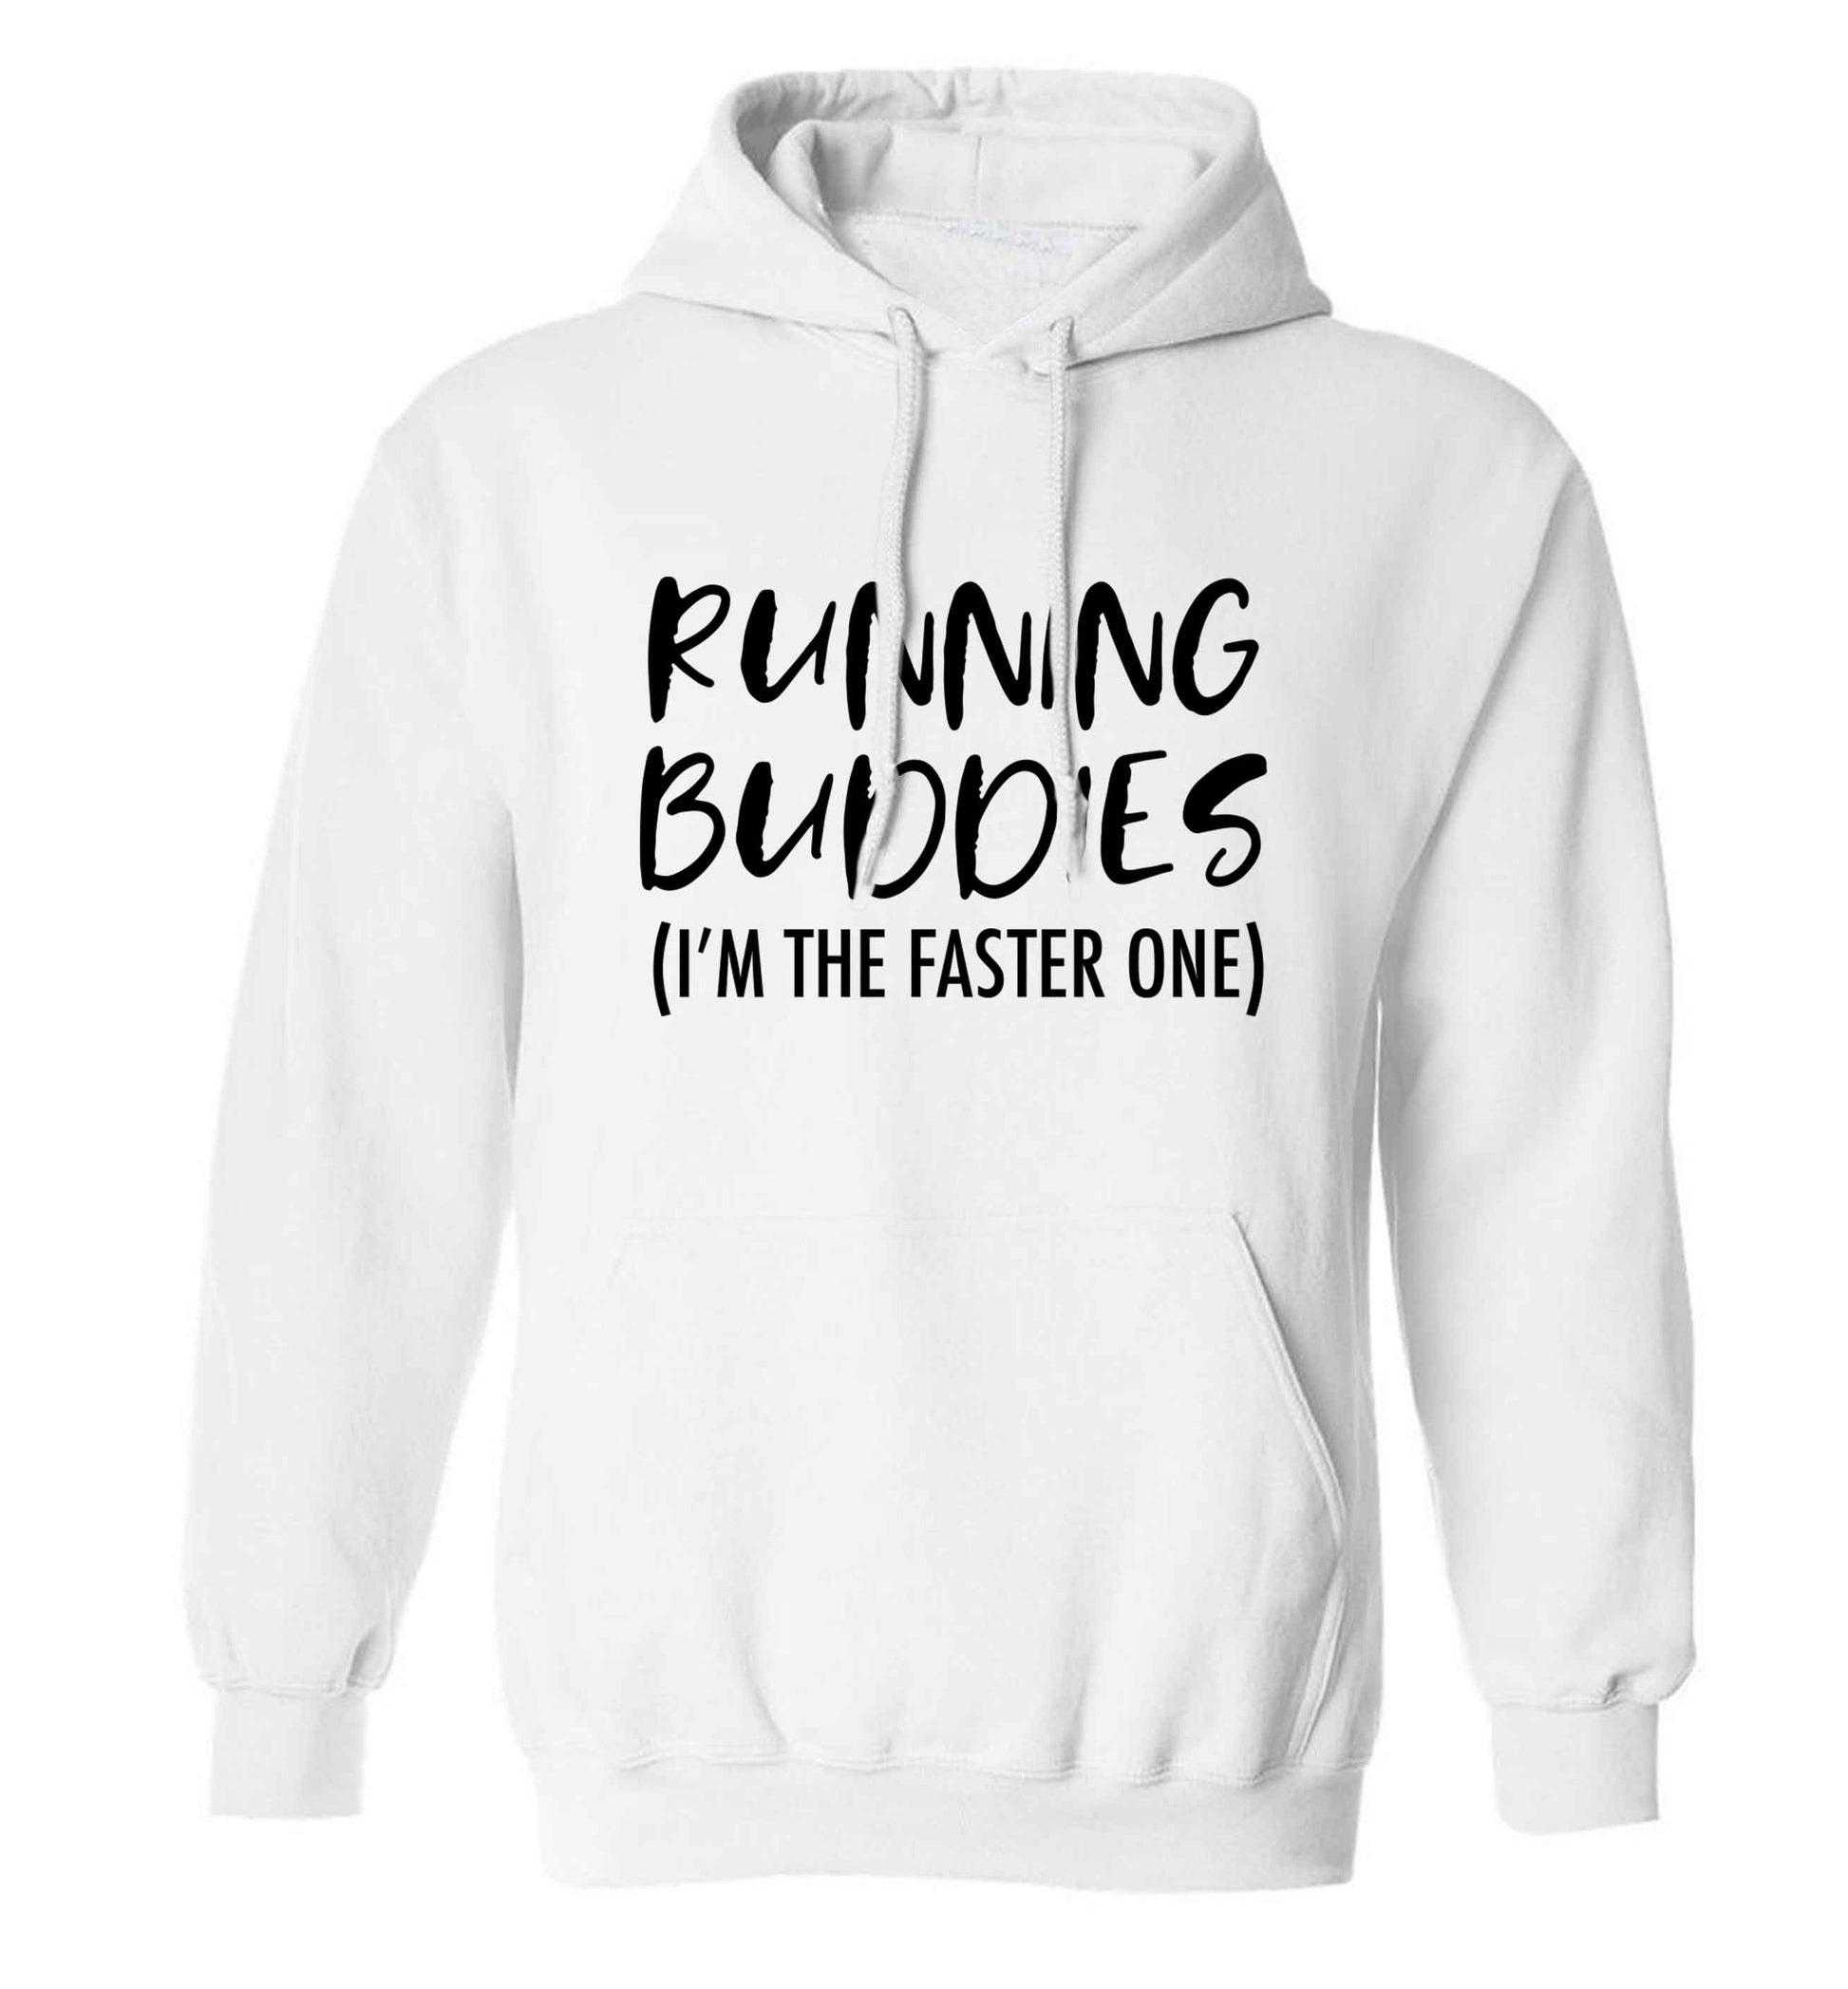 Running buddies (I'm the faster one) adults unisex white hoodie 2XL